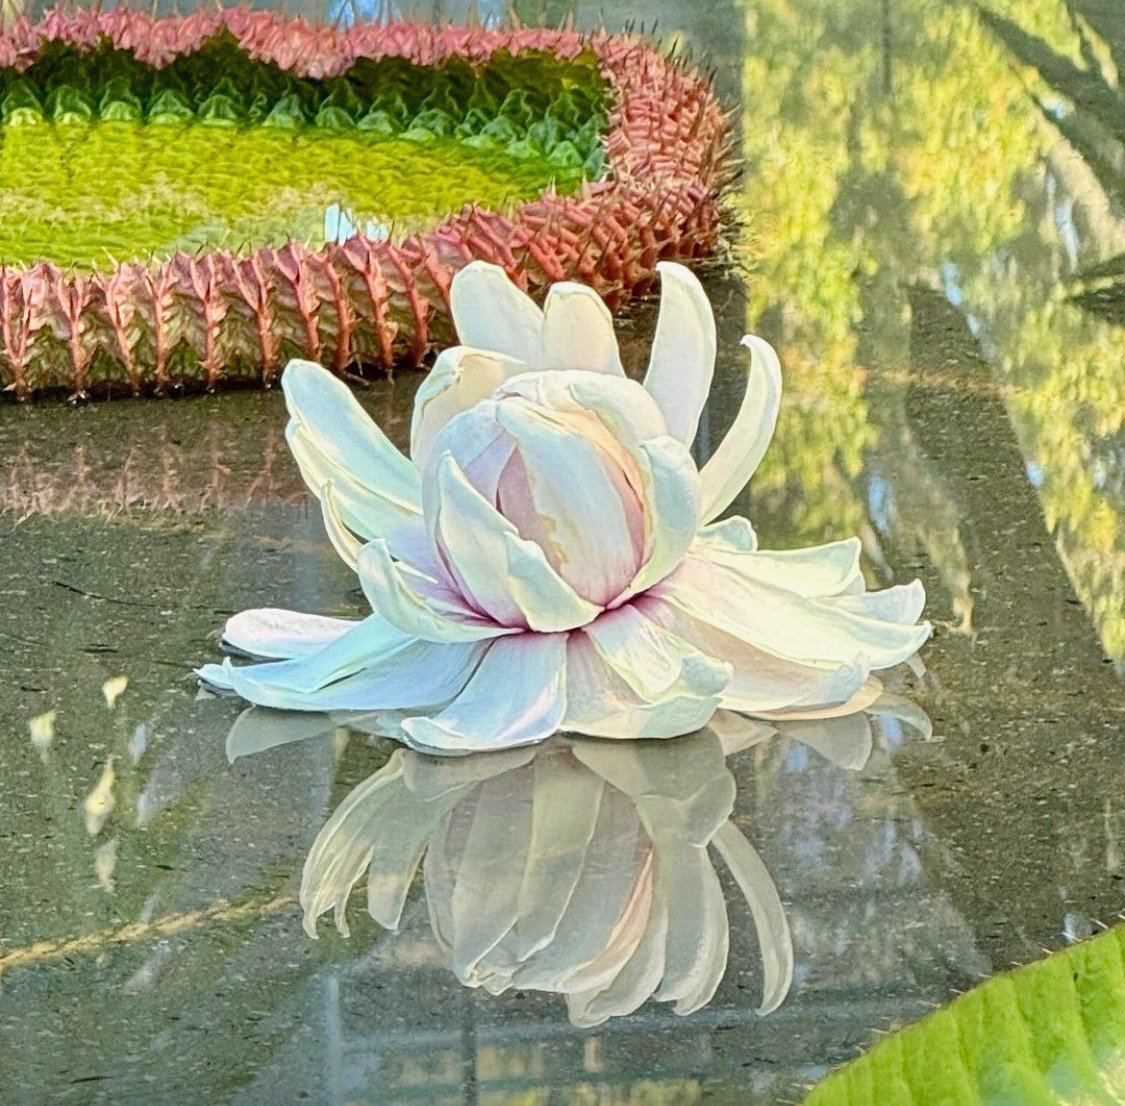 @ingridkellenbach captured this spectacular Victoria amazonica water lily in full bloom at the Adelaide Botanic Garden [Park 11] on the weekend.

&quot;So lucky to see it bloom as the flower only lasts 48 hours,&quot; Ingrid writes. &quot;As the flow